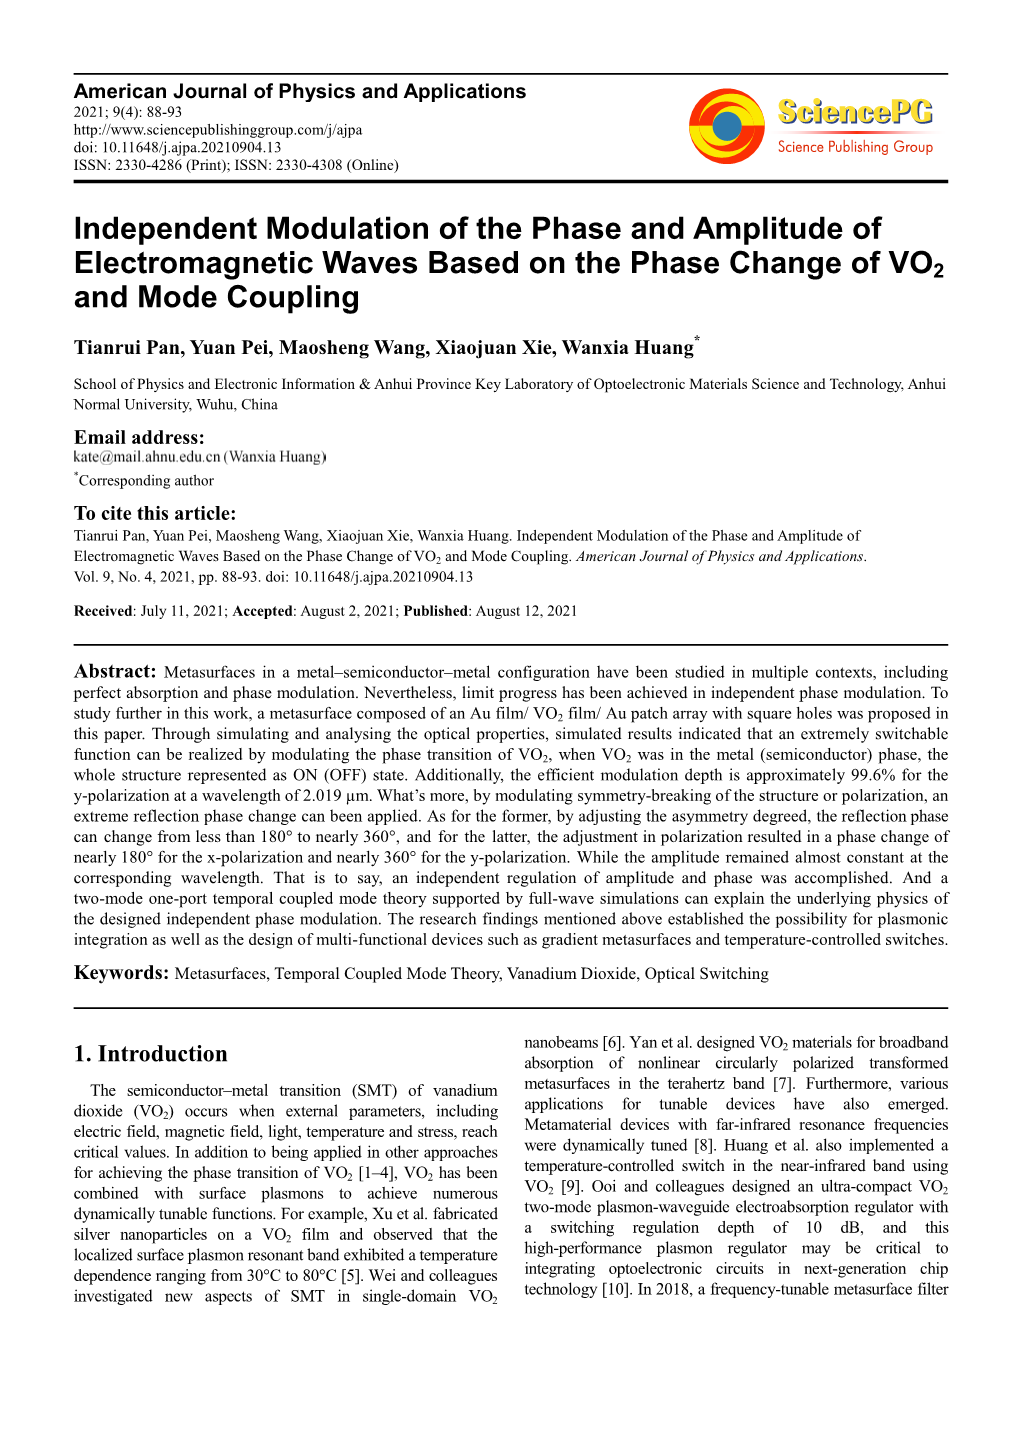 Independent Modulation of the Phase and Amplitude of Electromagnetic Waves Based on the Phase Change of VO 2 and Mode Coupling